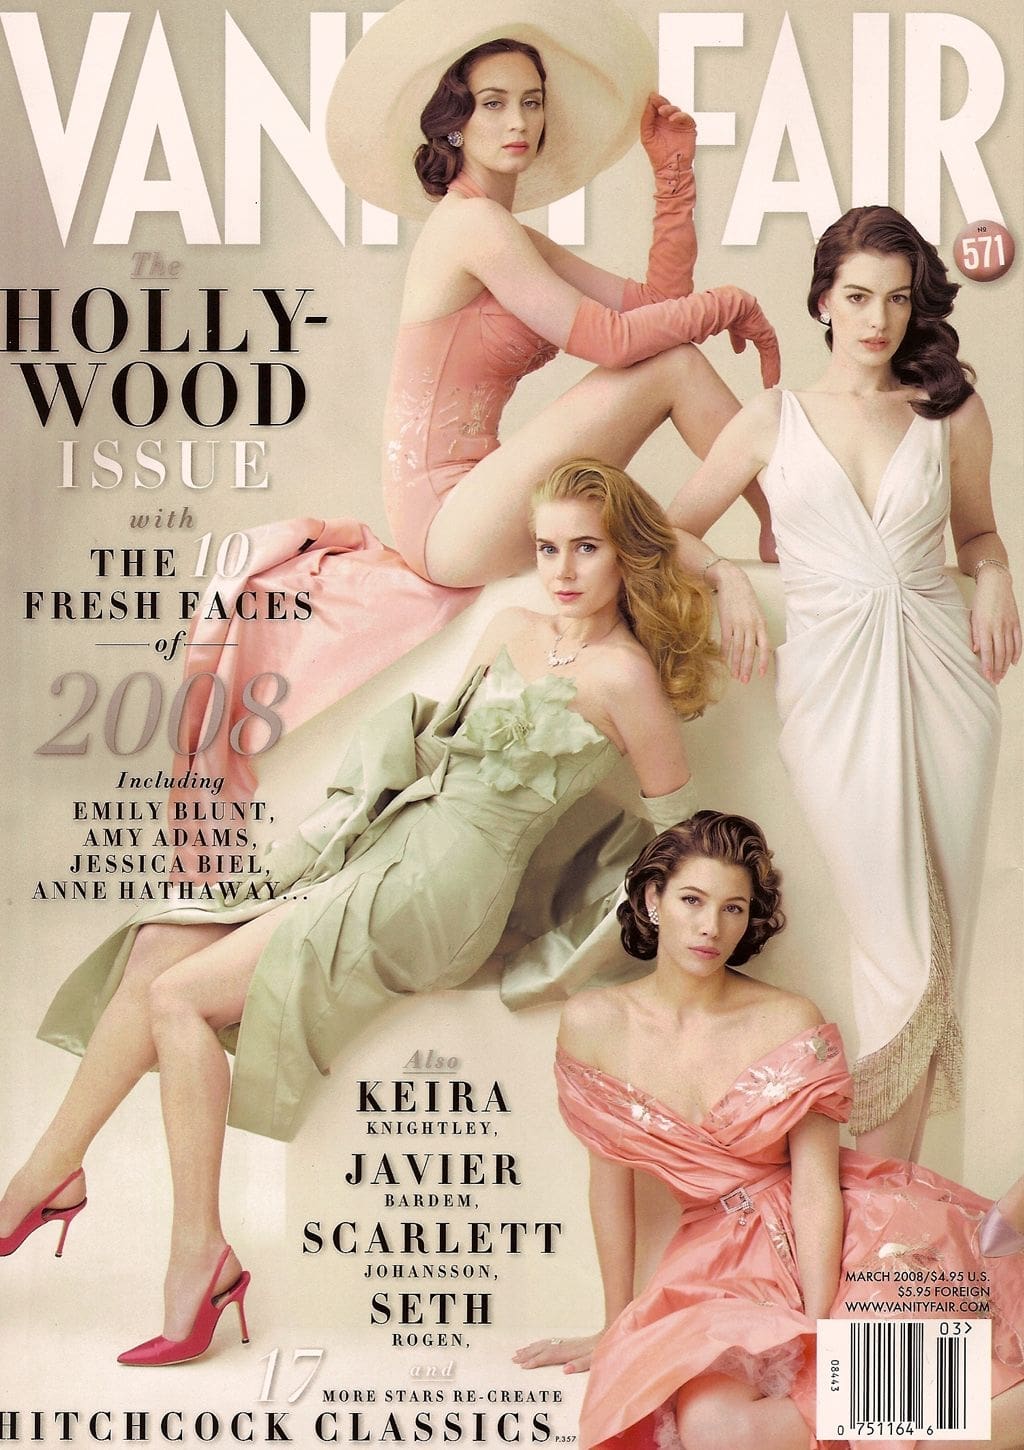 Emily Blunt, Amy Adams, Jessica Biel and Anne Hathaway pose for the cover of Vanity Fair's March 2008 The Hollywood Issue